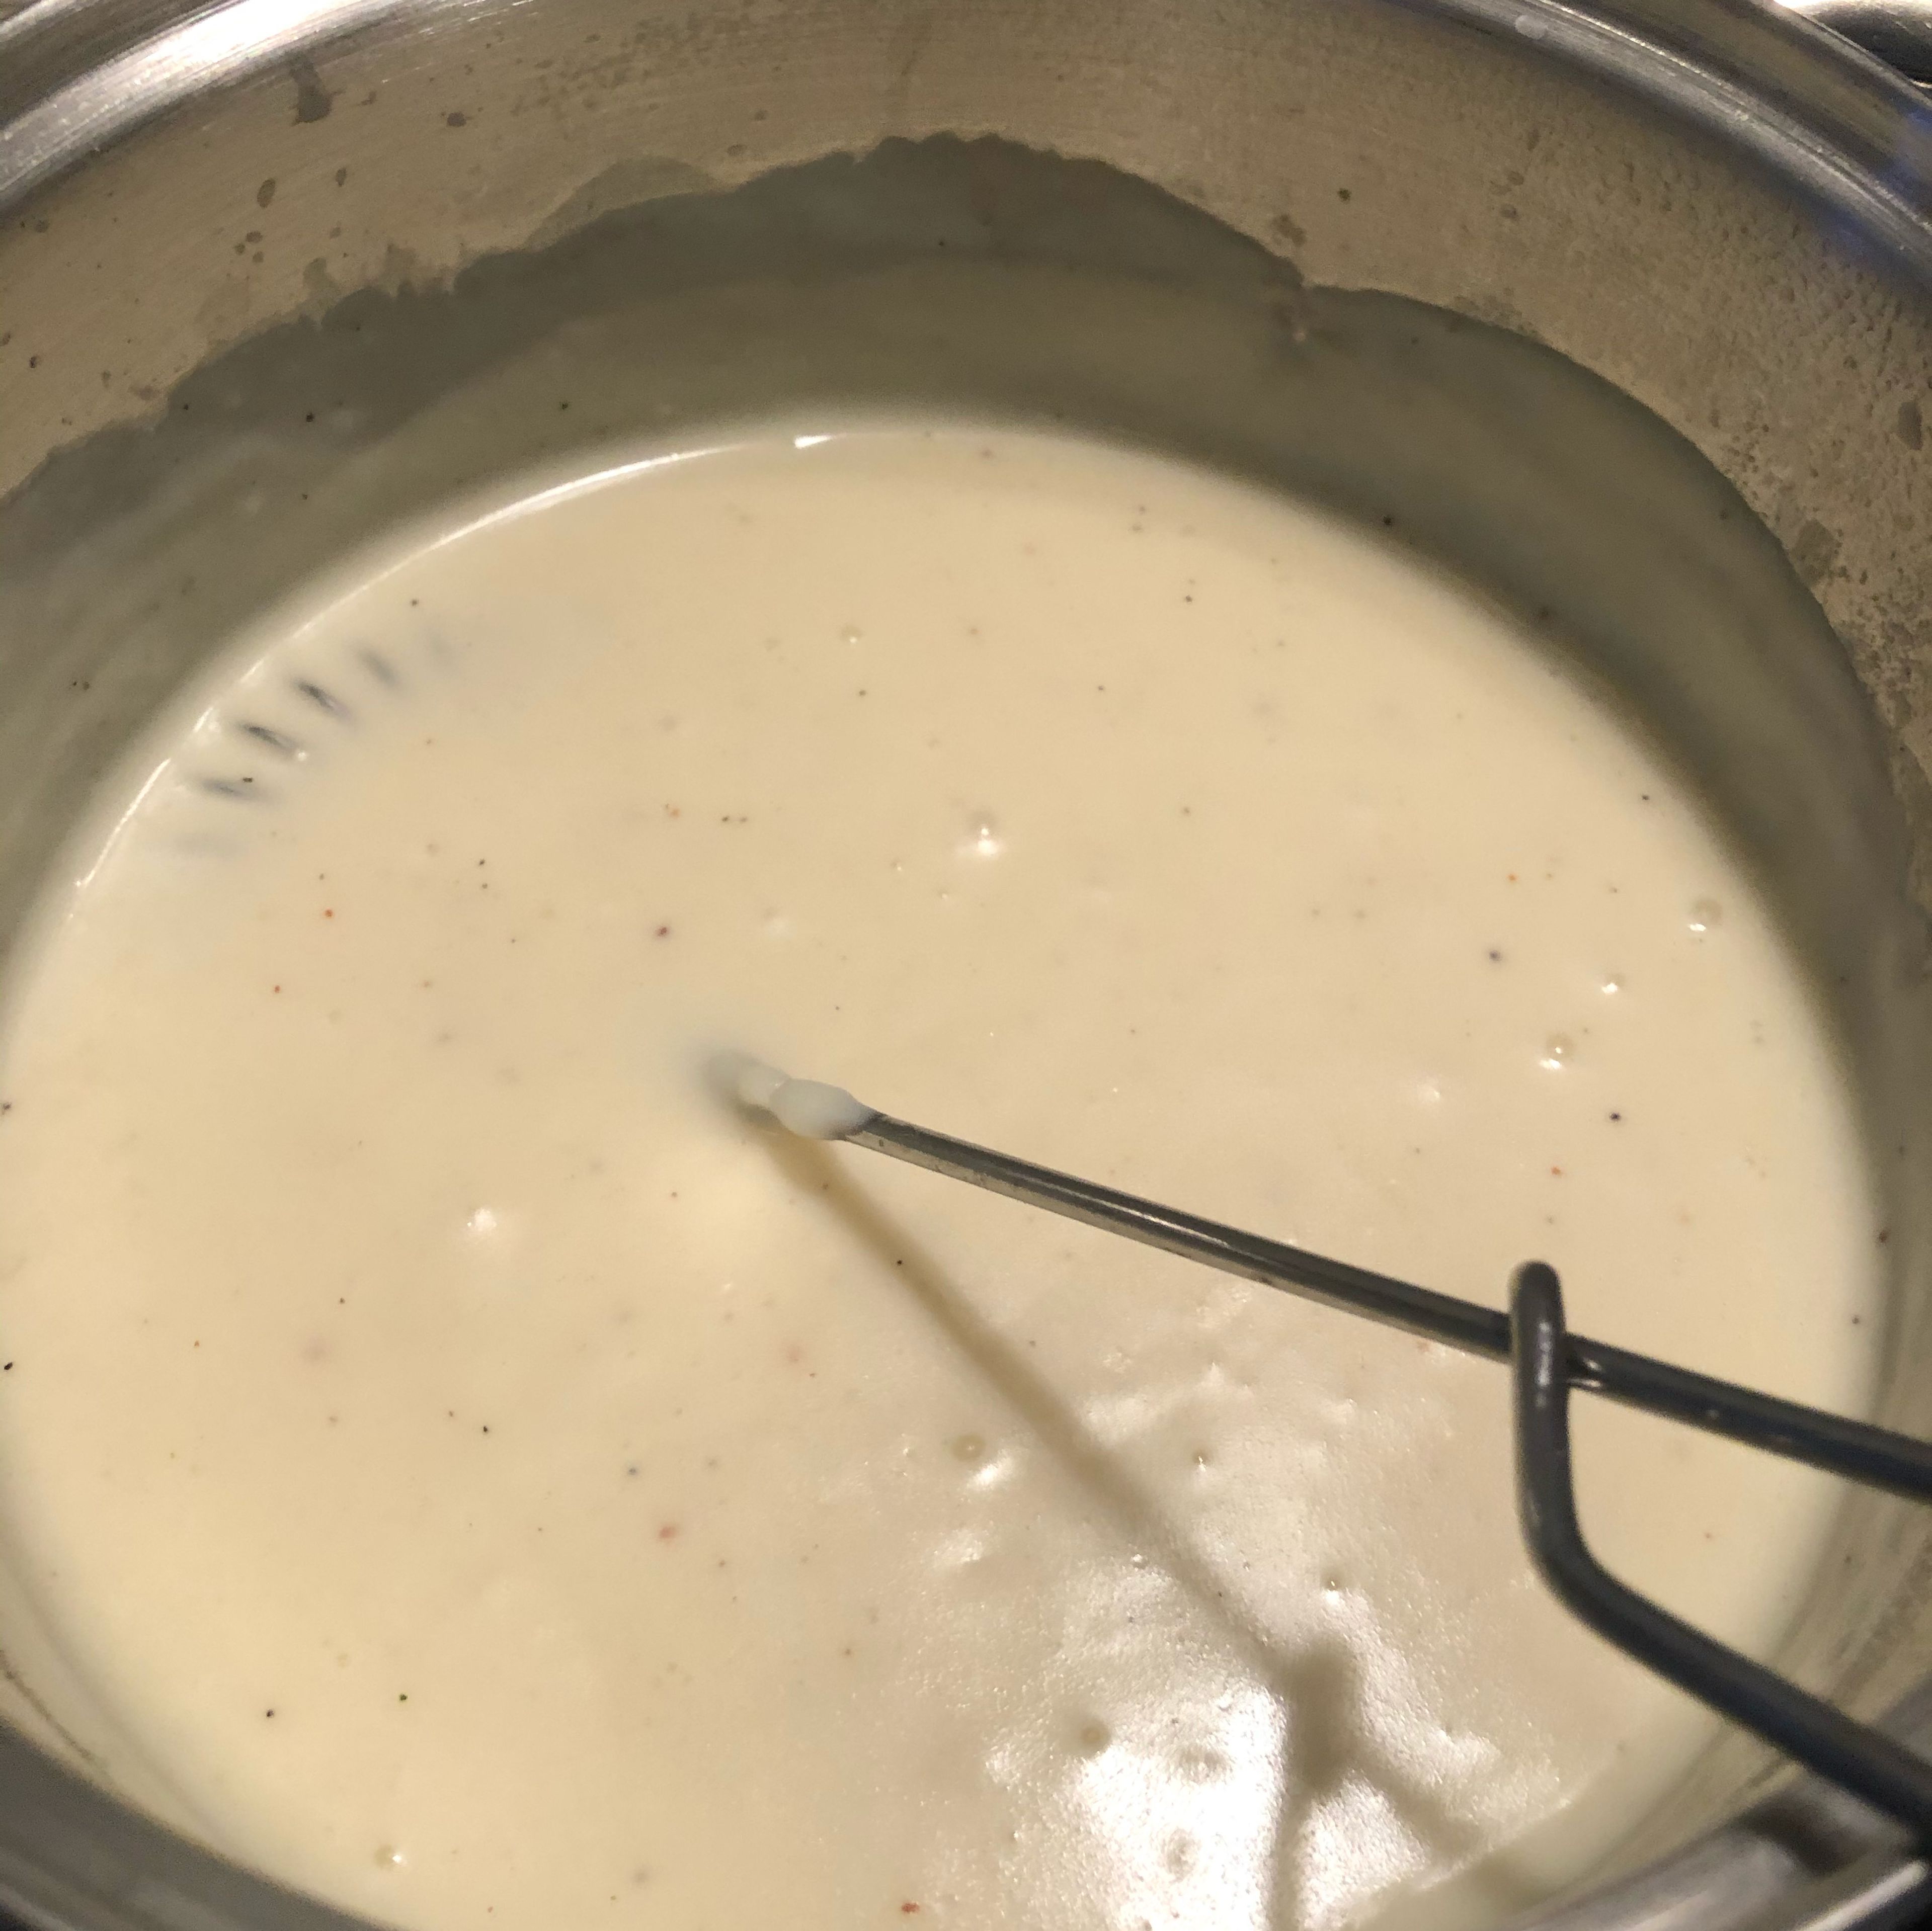 Preheat oven to 180°C/350°F convection. Prepare the béchamel sauce. To do so, heat the butter in a saucepan and once it is completely dissolved, add the flour. Stir well and if necessary reduce the heat a bit so it won't become sticky. Add milk and bring to a boil, continuing stirring. Tip: If you heat the milk slightly beforehand, it will go even quicker! Season to taste with salt, pepper and nutmeg. If desired, add approx. 50g of cheese to the sauce.